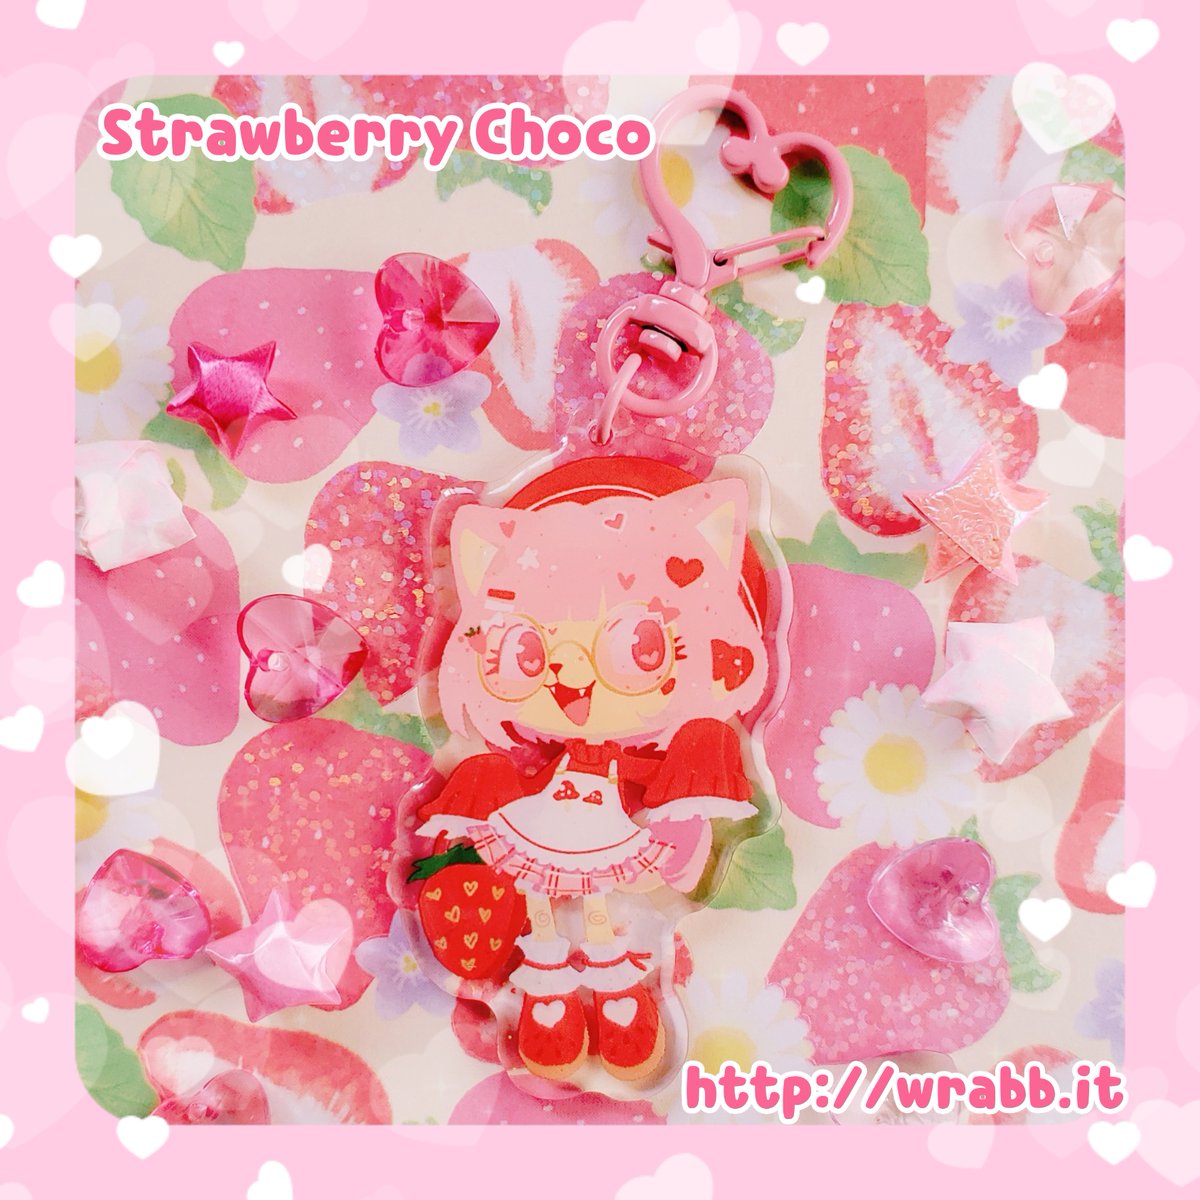 My OC Strawberry Choco is so perfect for Valentines Day 🥰🍓🍄
links to all these below! 👇 